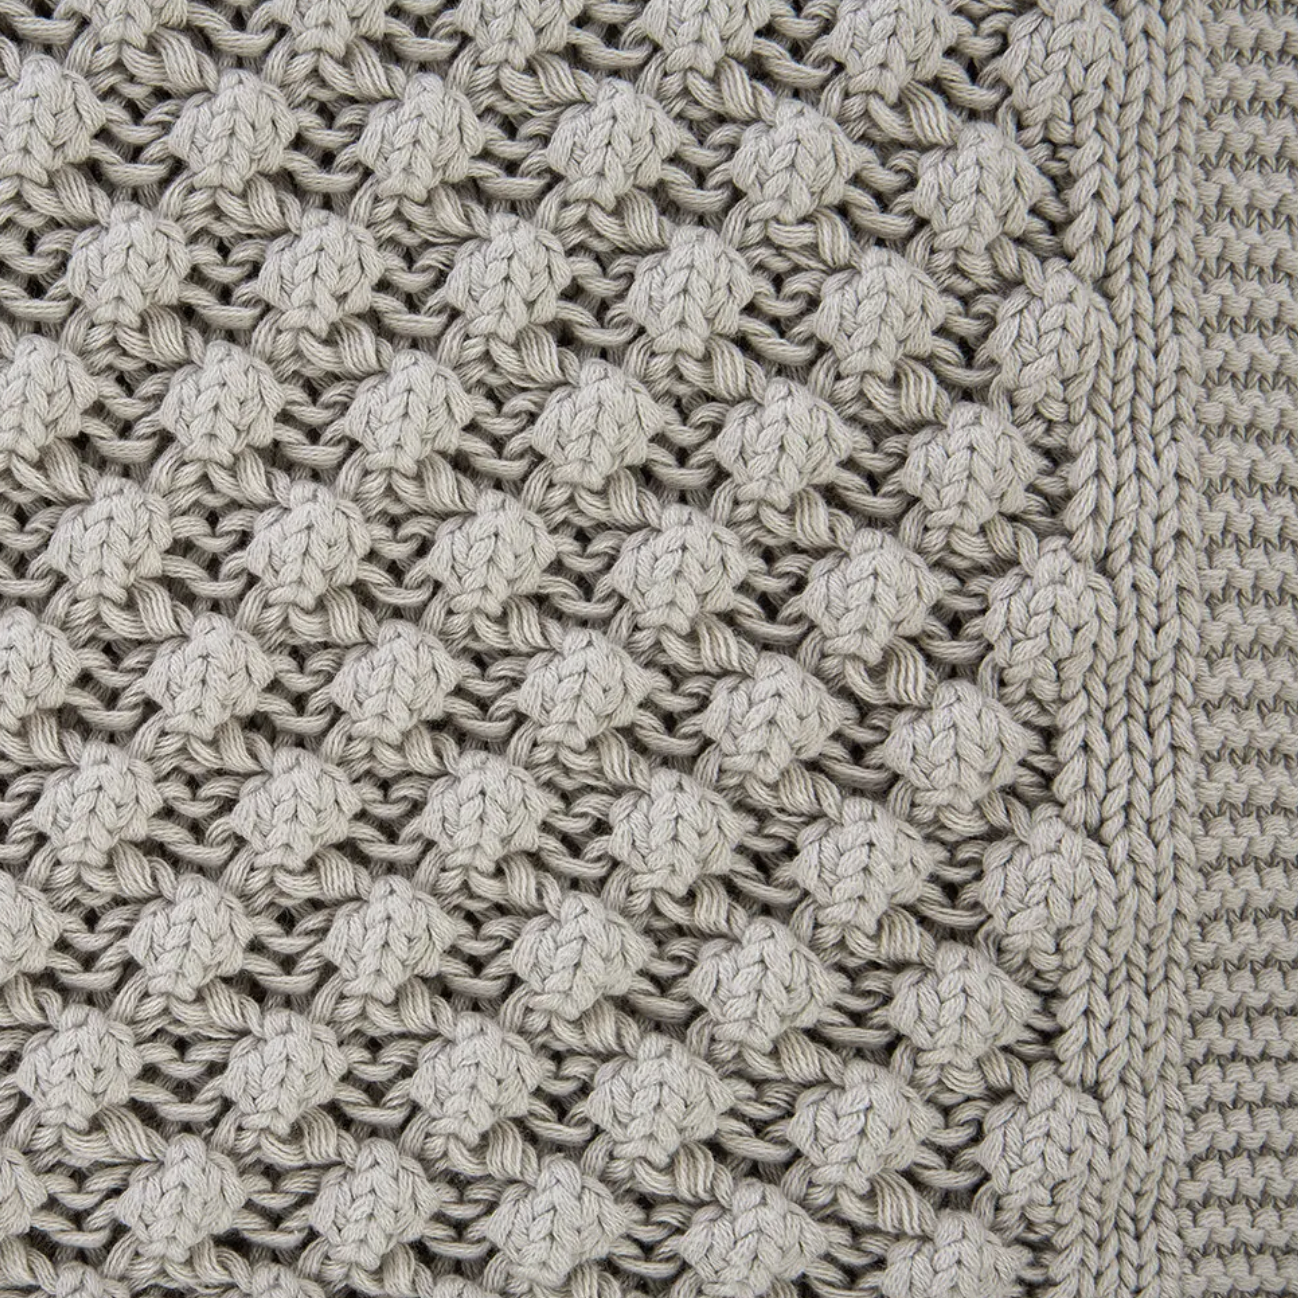 Weave Effect Knitted Throw